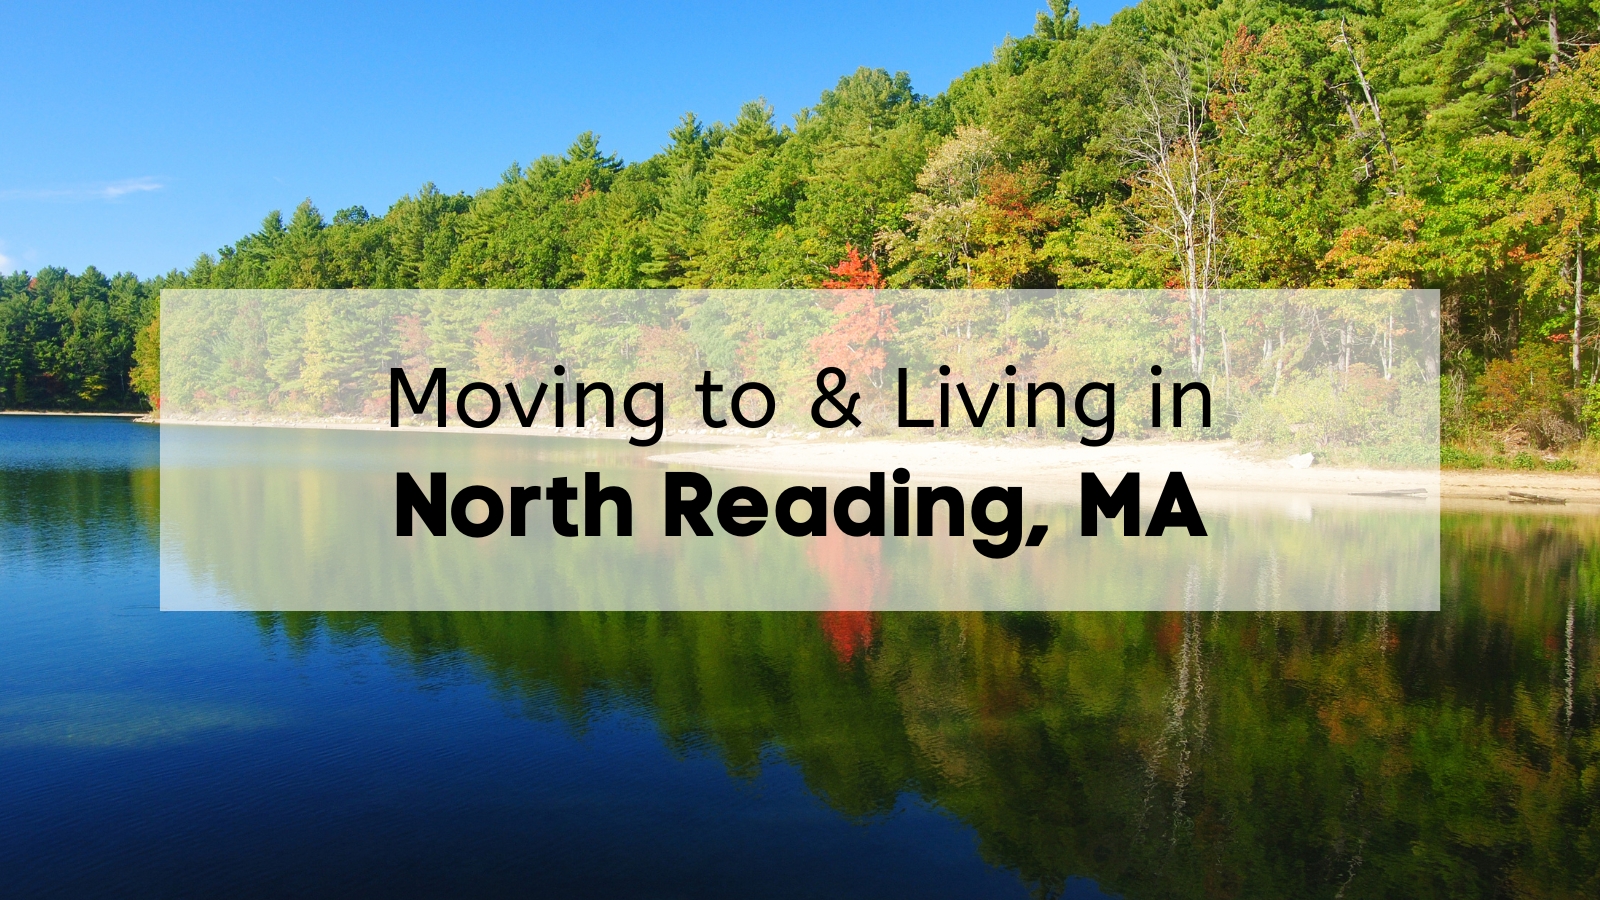 Moving to & Living in North Reading, MA